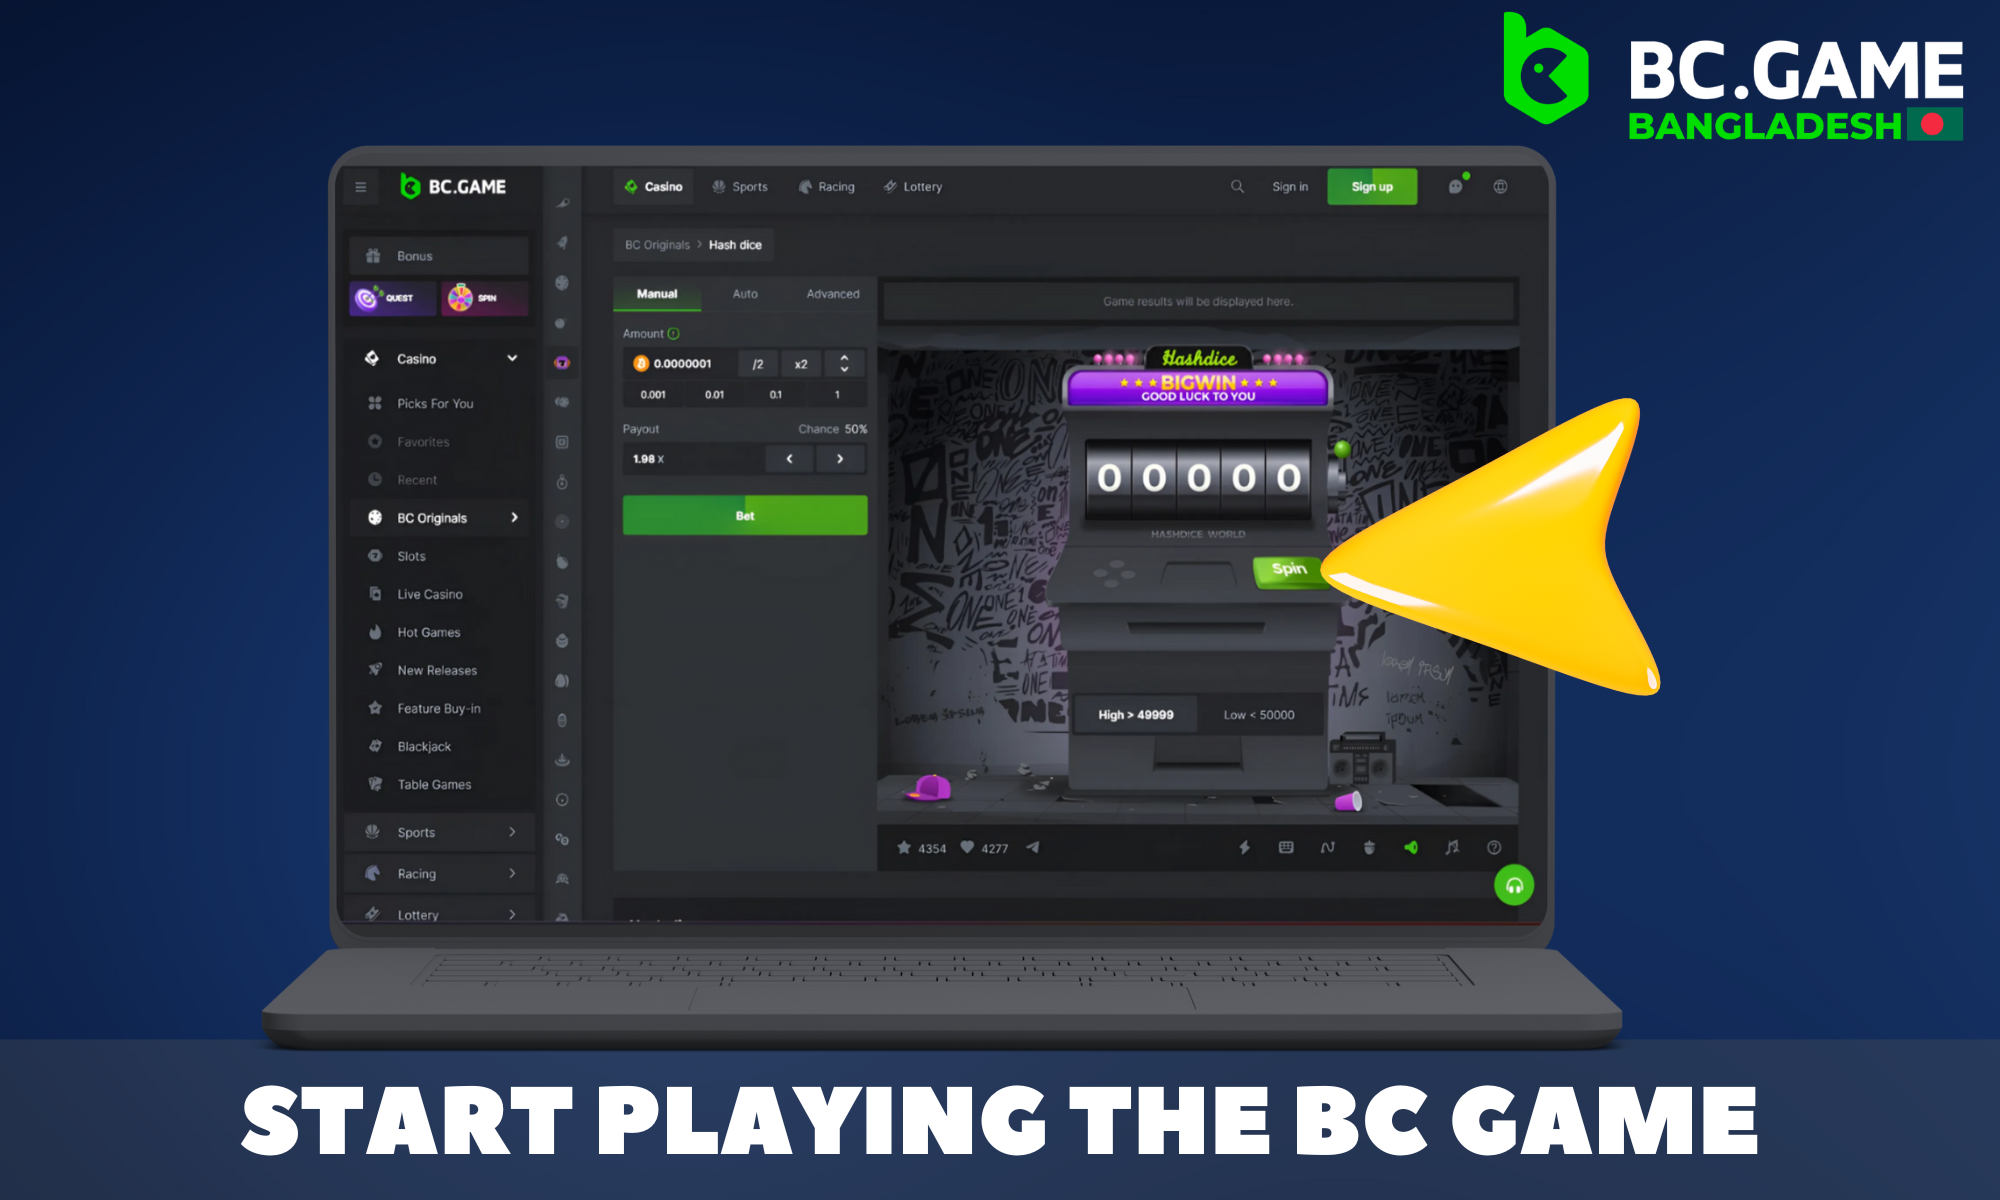 Step by step how to start playing games on the BC Game website